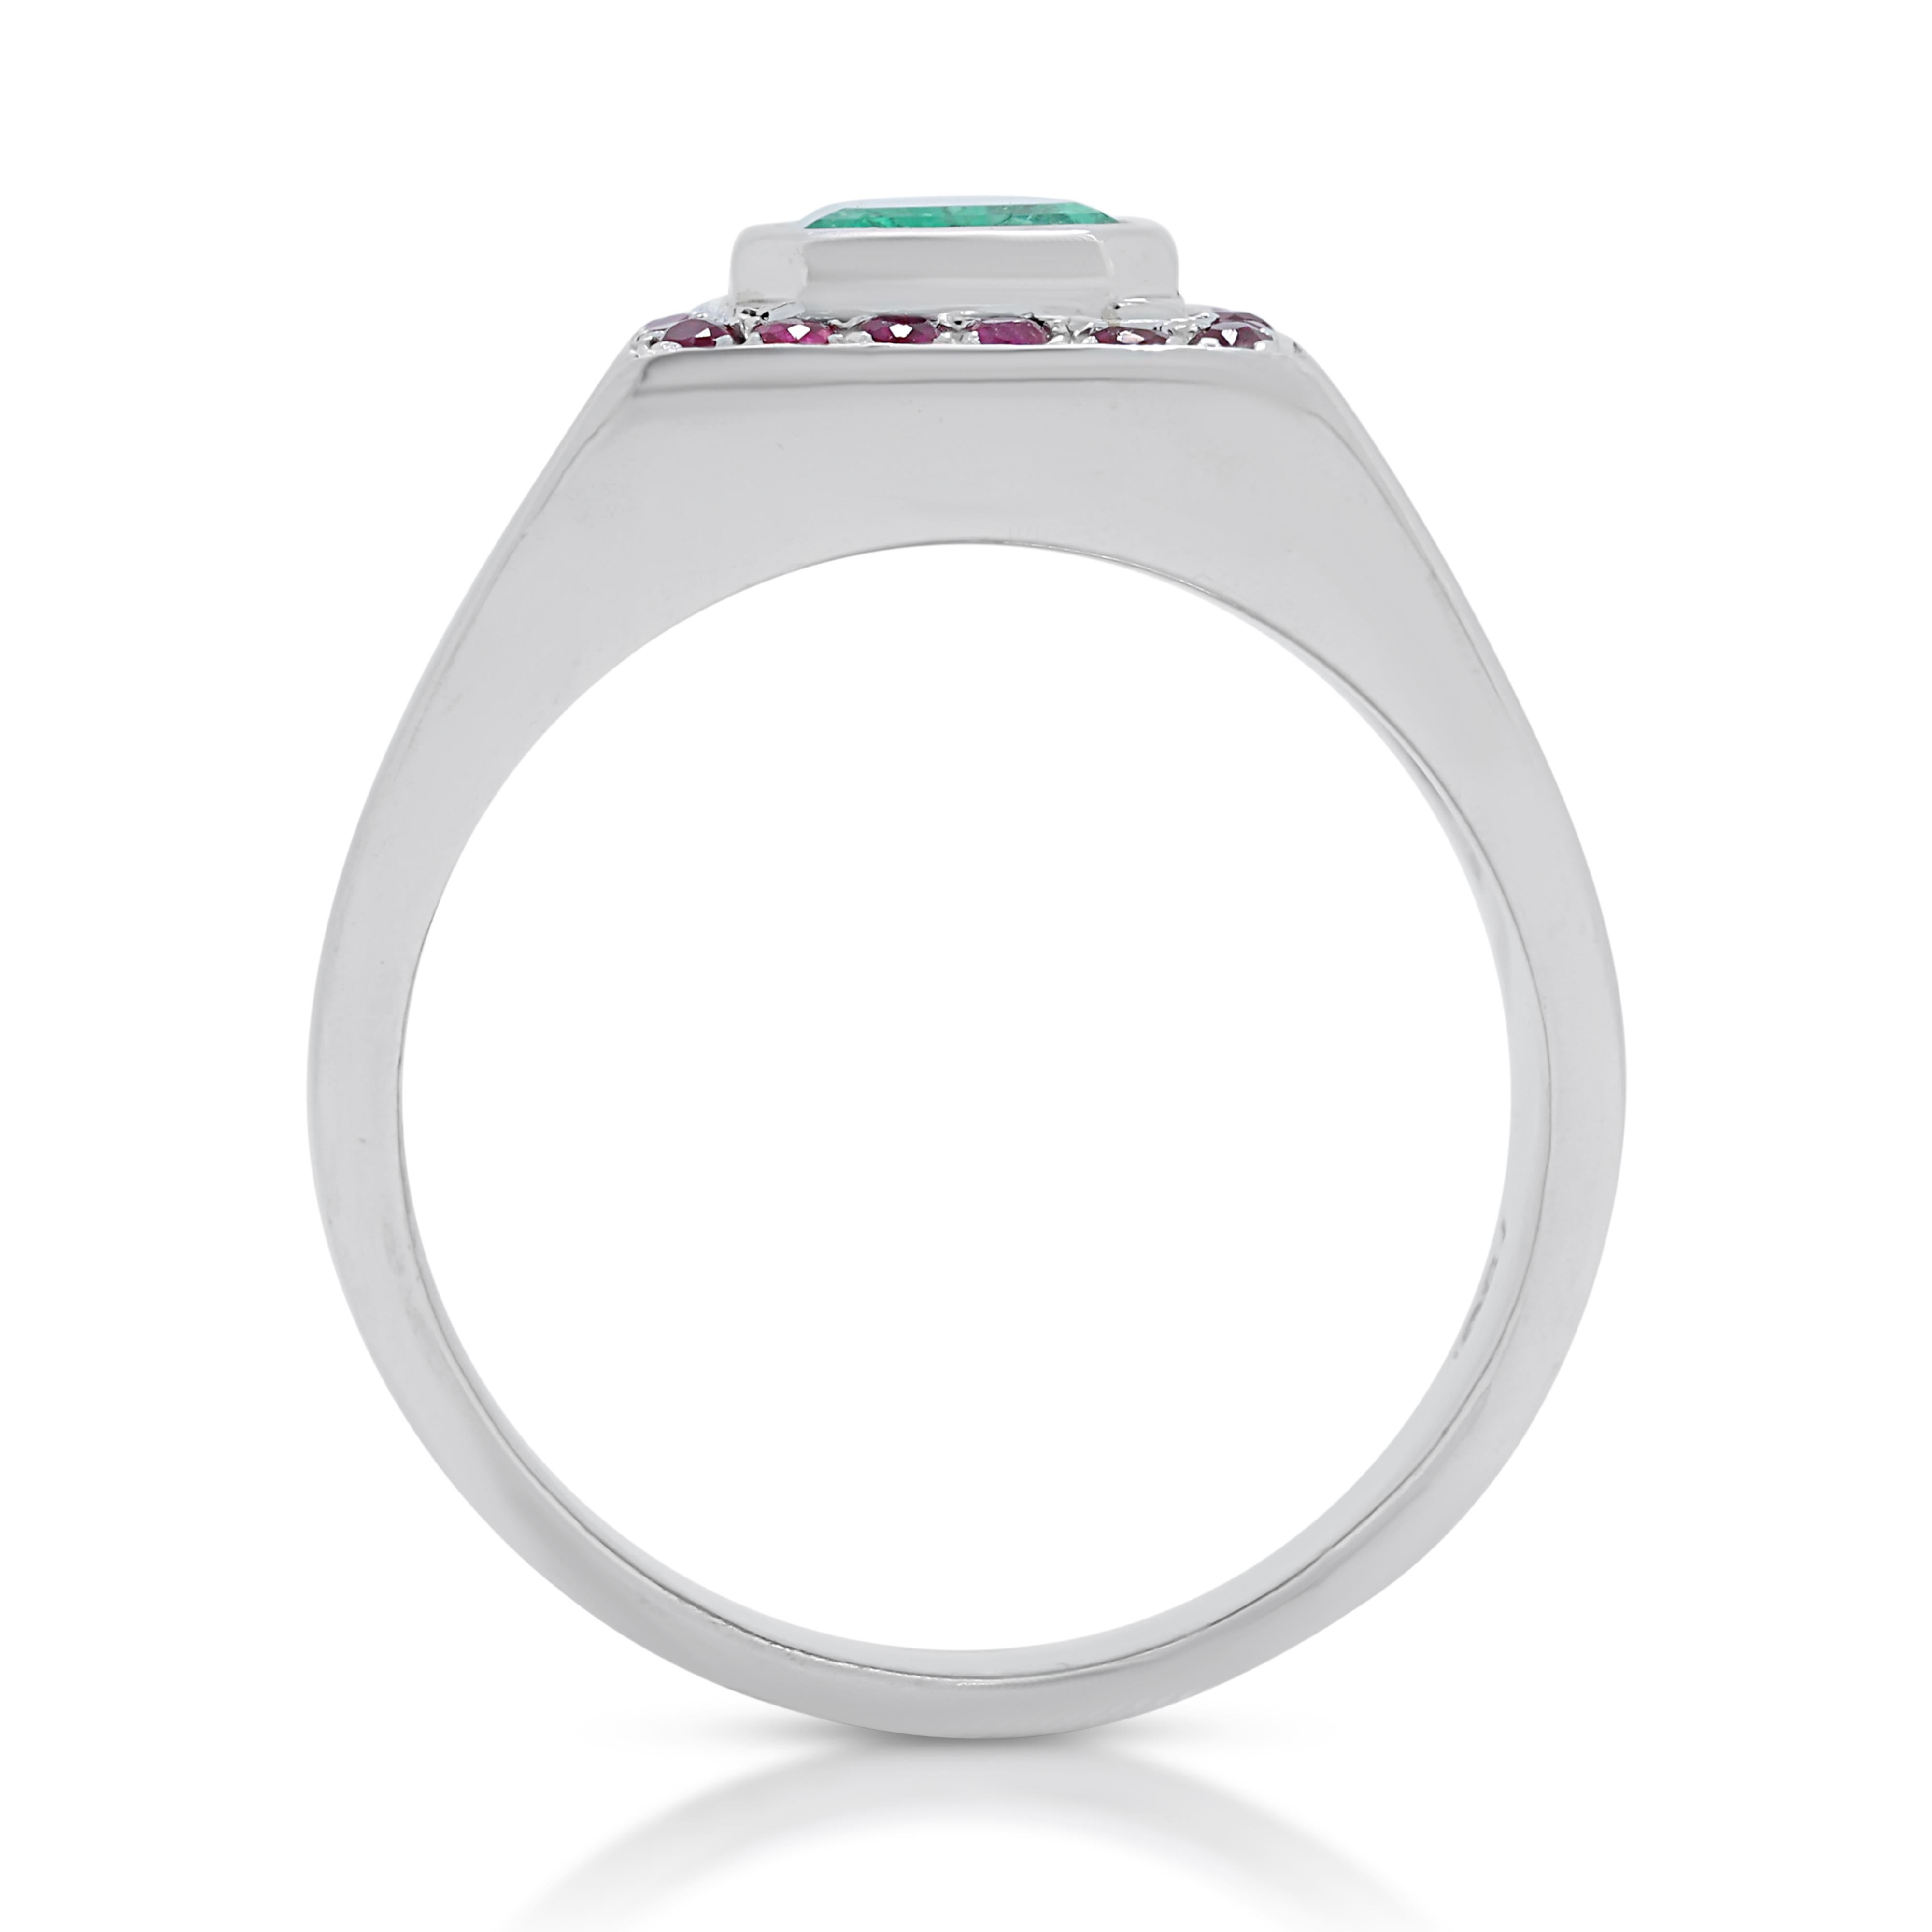 Stylish 1.05ct Emerald Dome Ring in 18K White Gold with Rubies For Sale 1